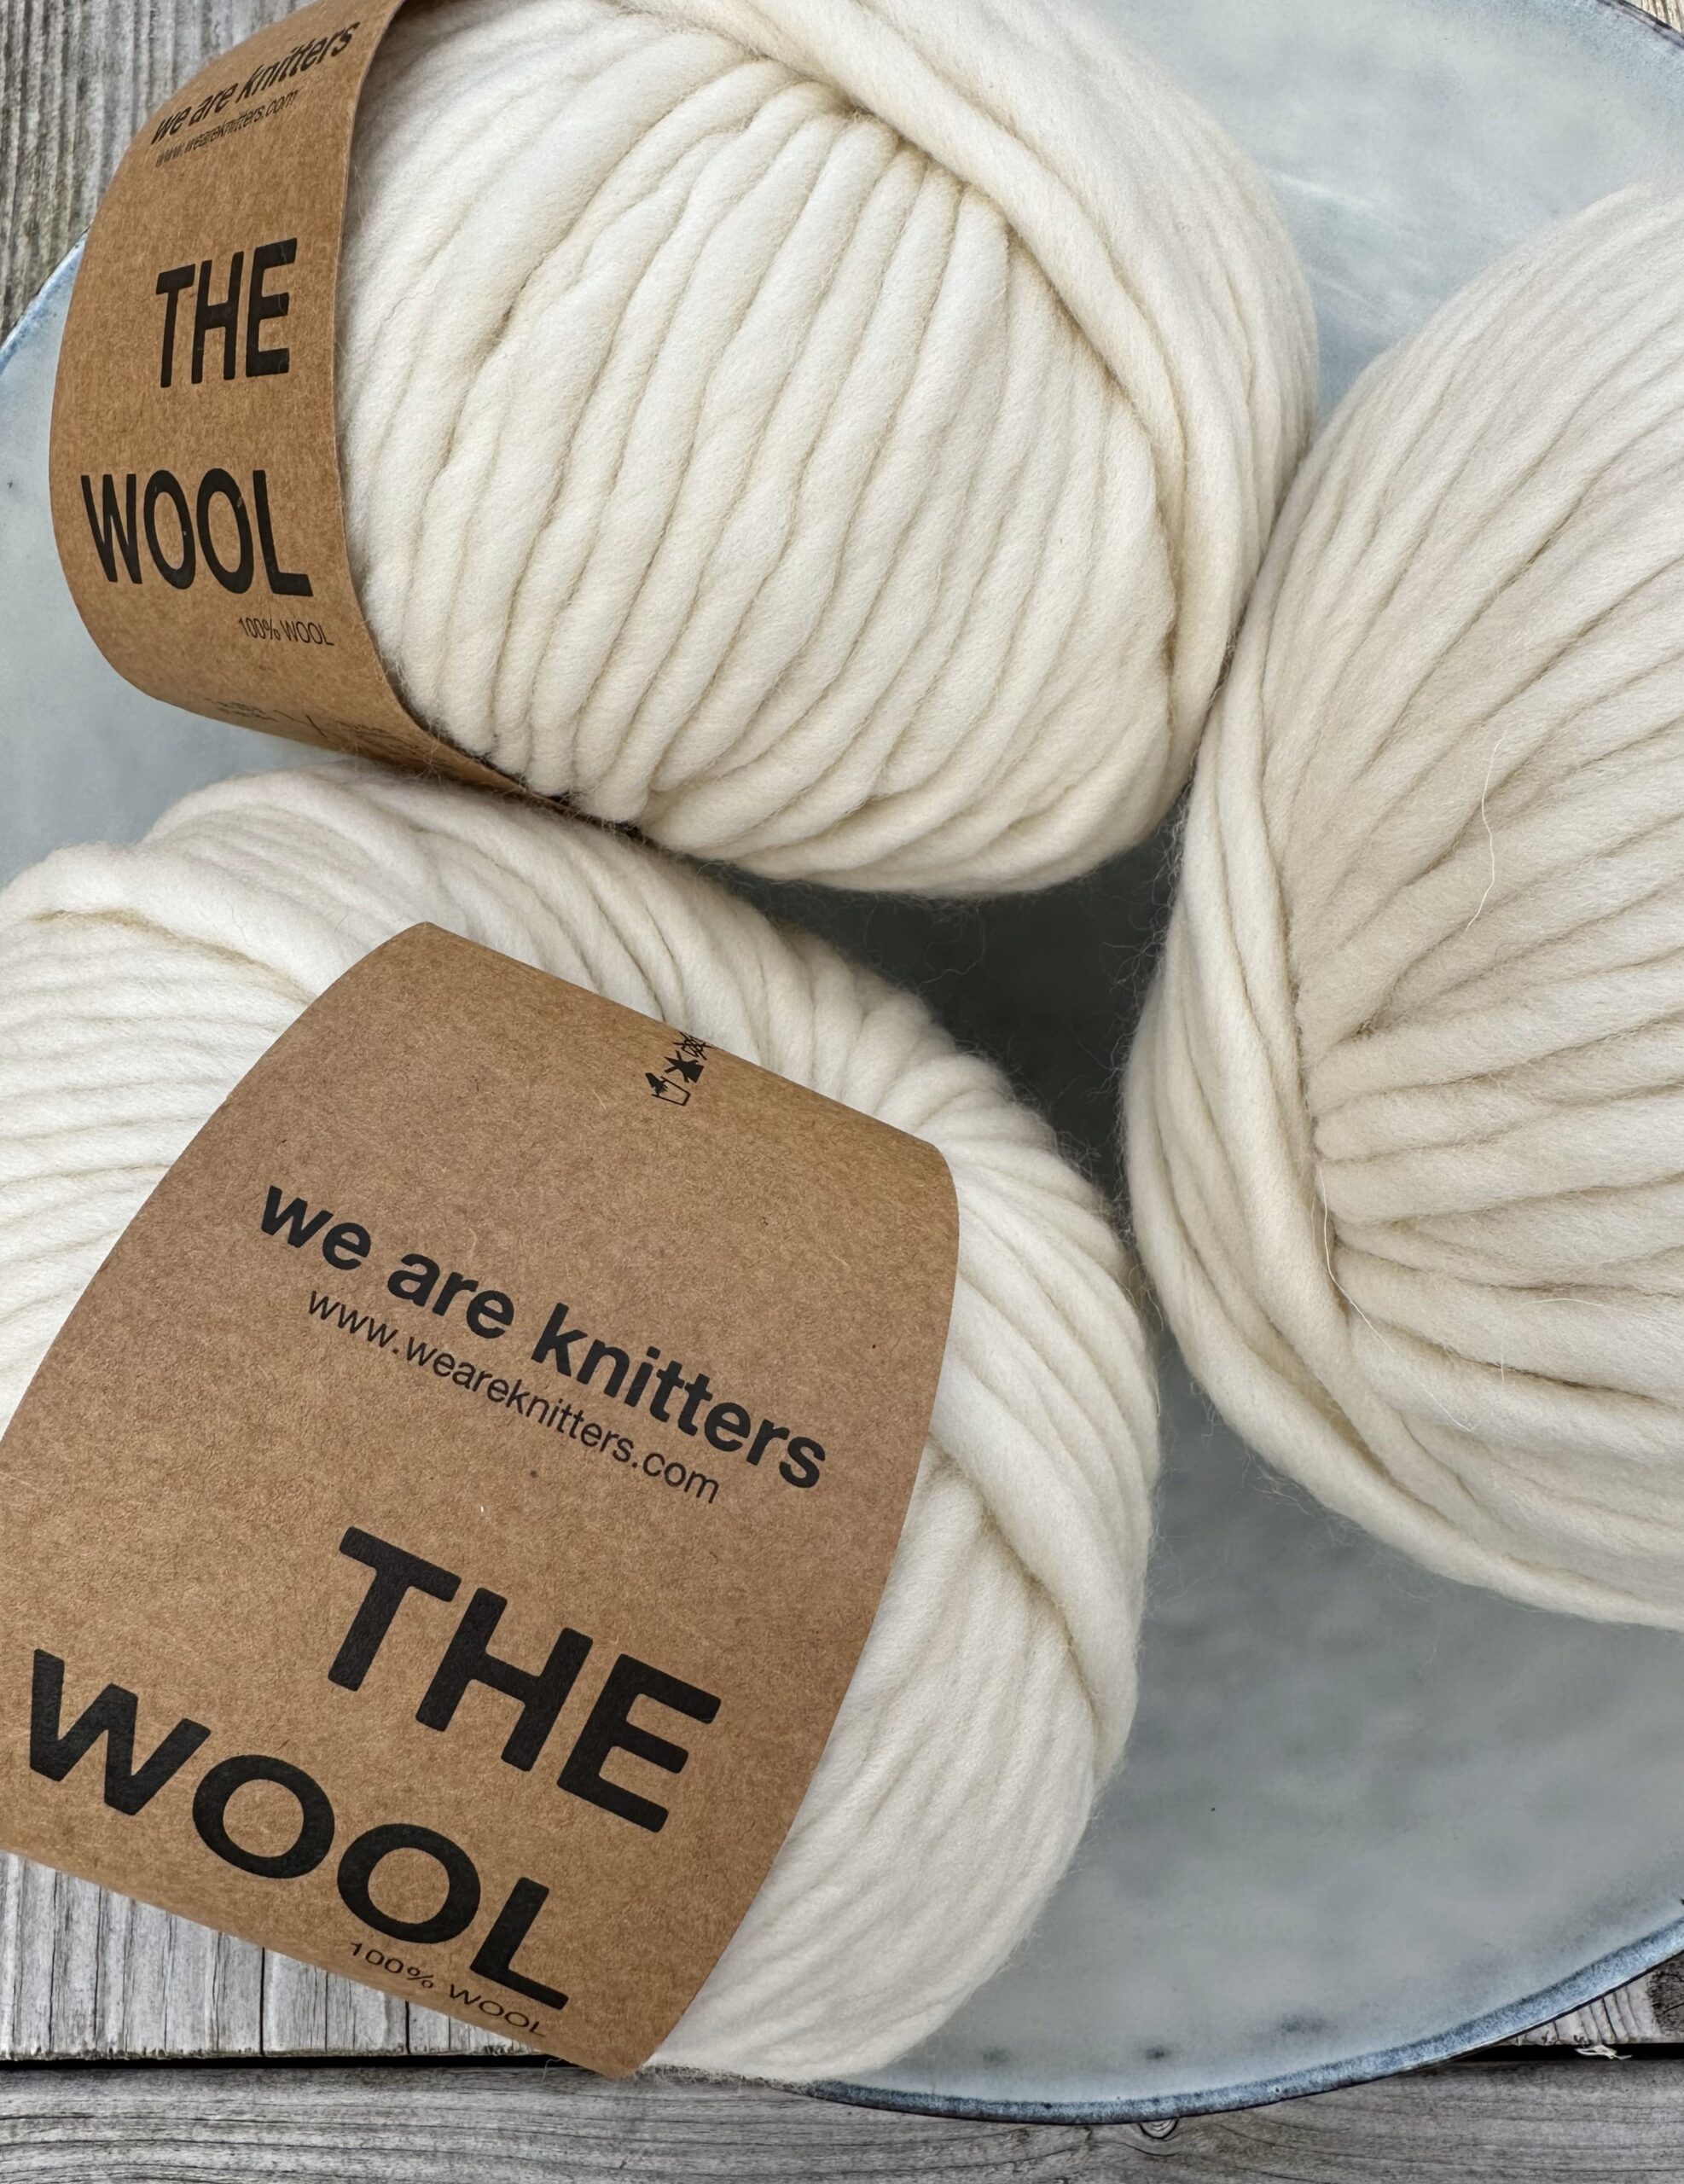 the wool natural wak